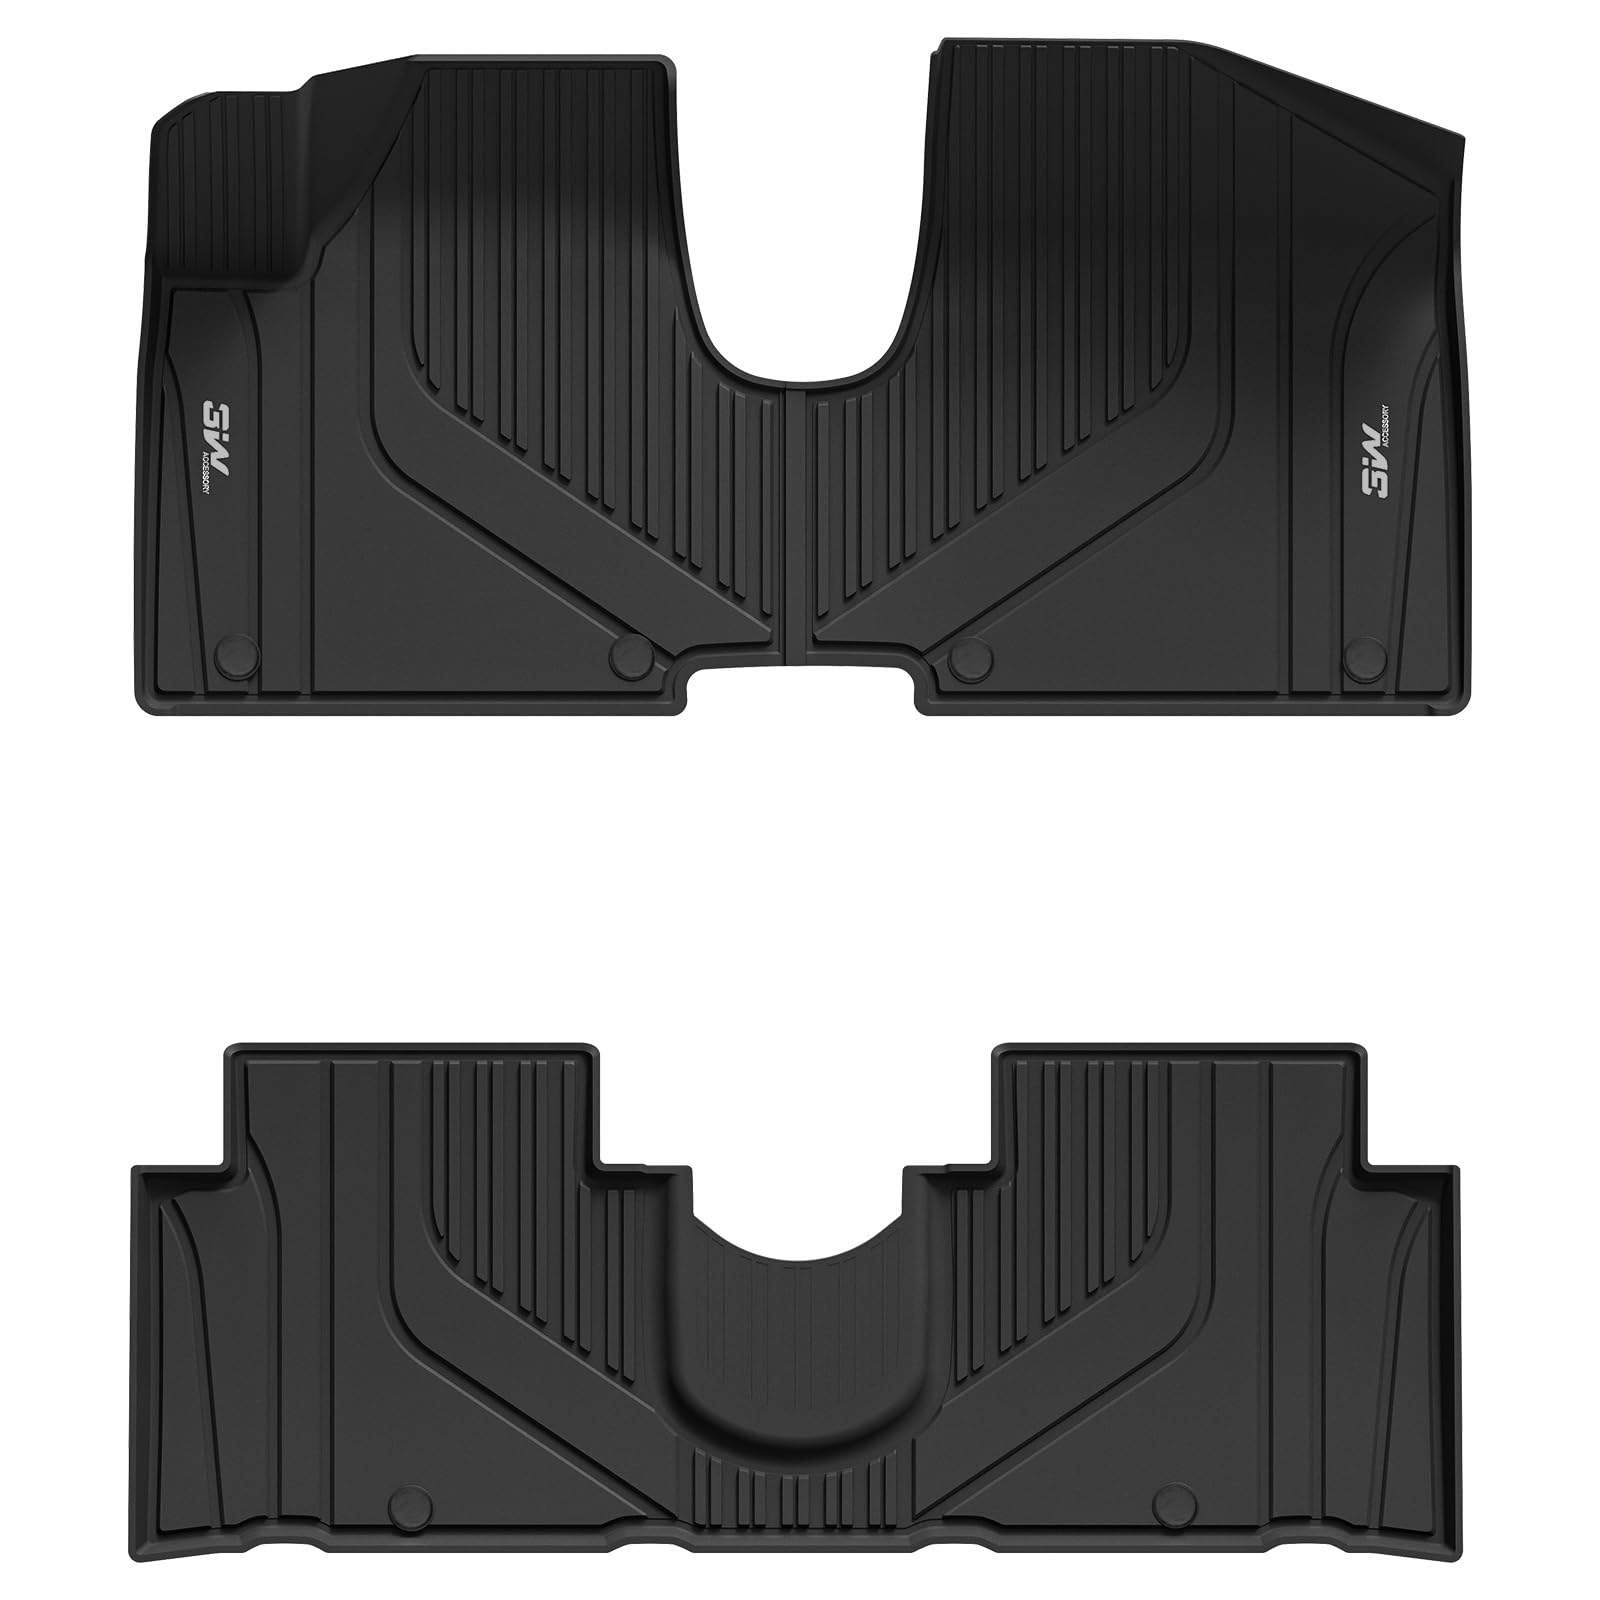 3W 2022-2023 Hyundai Ioniq 5 (Only for Sliding Console) Custom Floor Mats TPE Material & All-Weather Protection Vehicles & Parts 3Wliners 2022-2023 Hyundai Ioniq 5 1st&2nd Row Mats